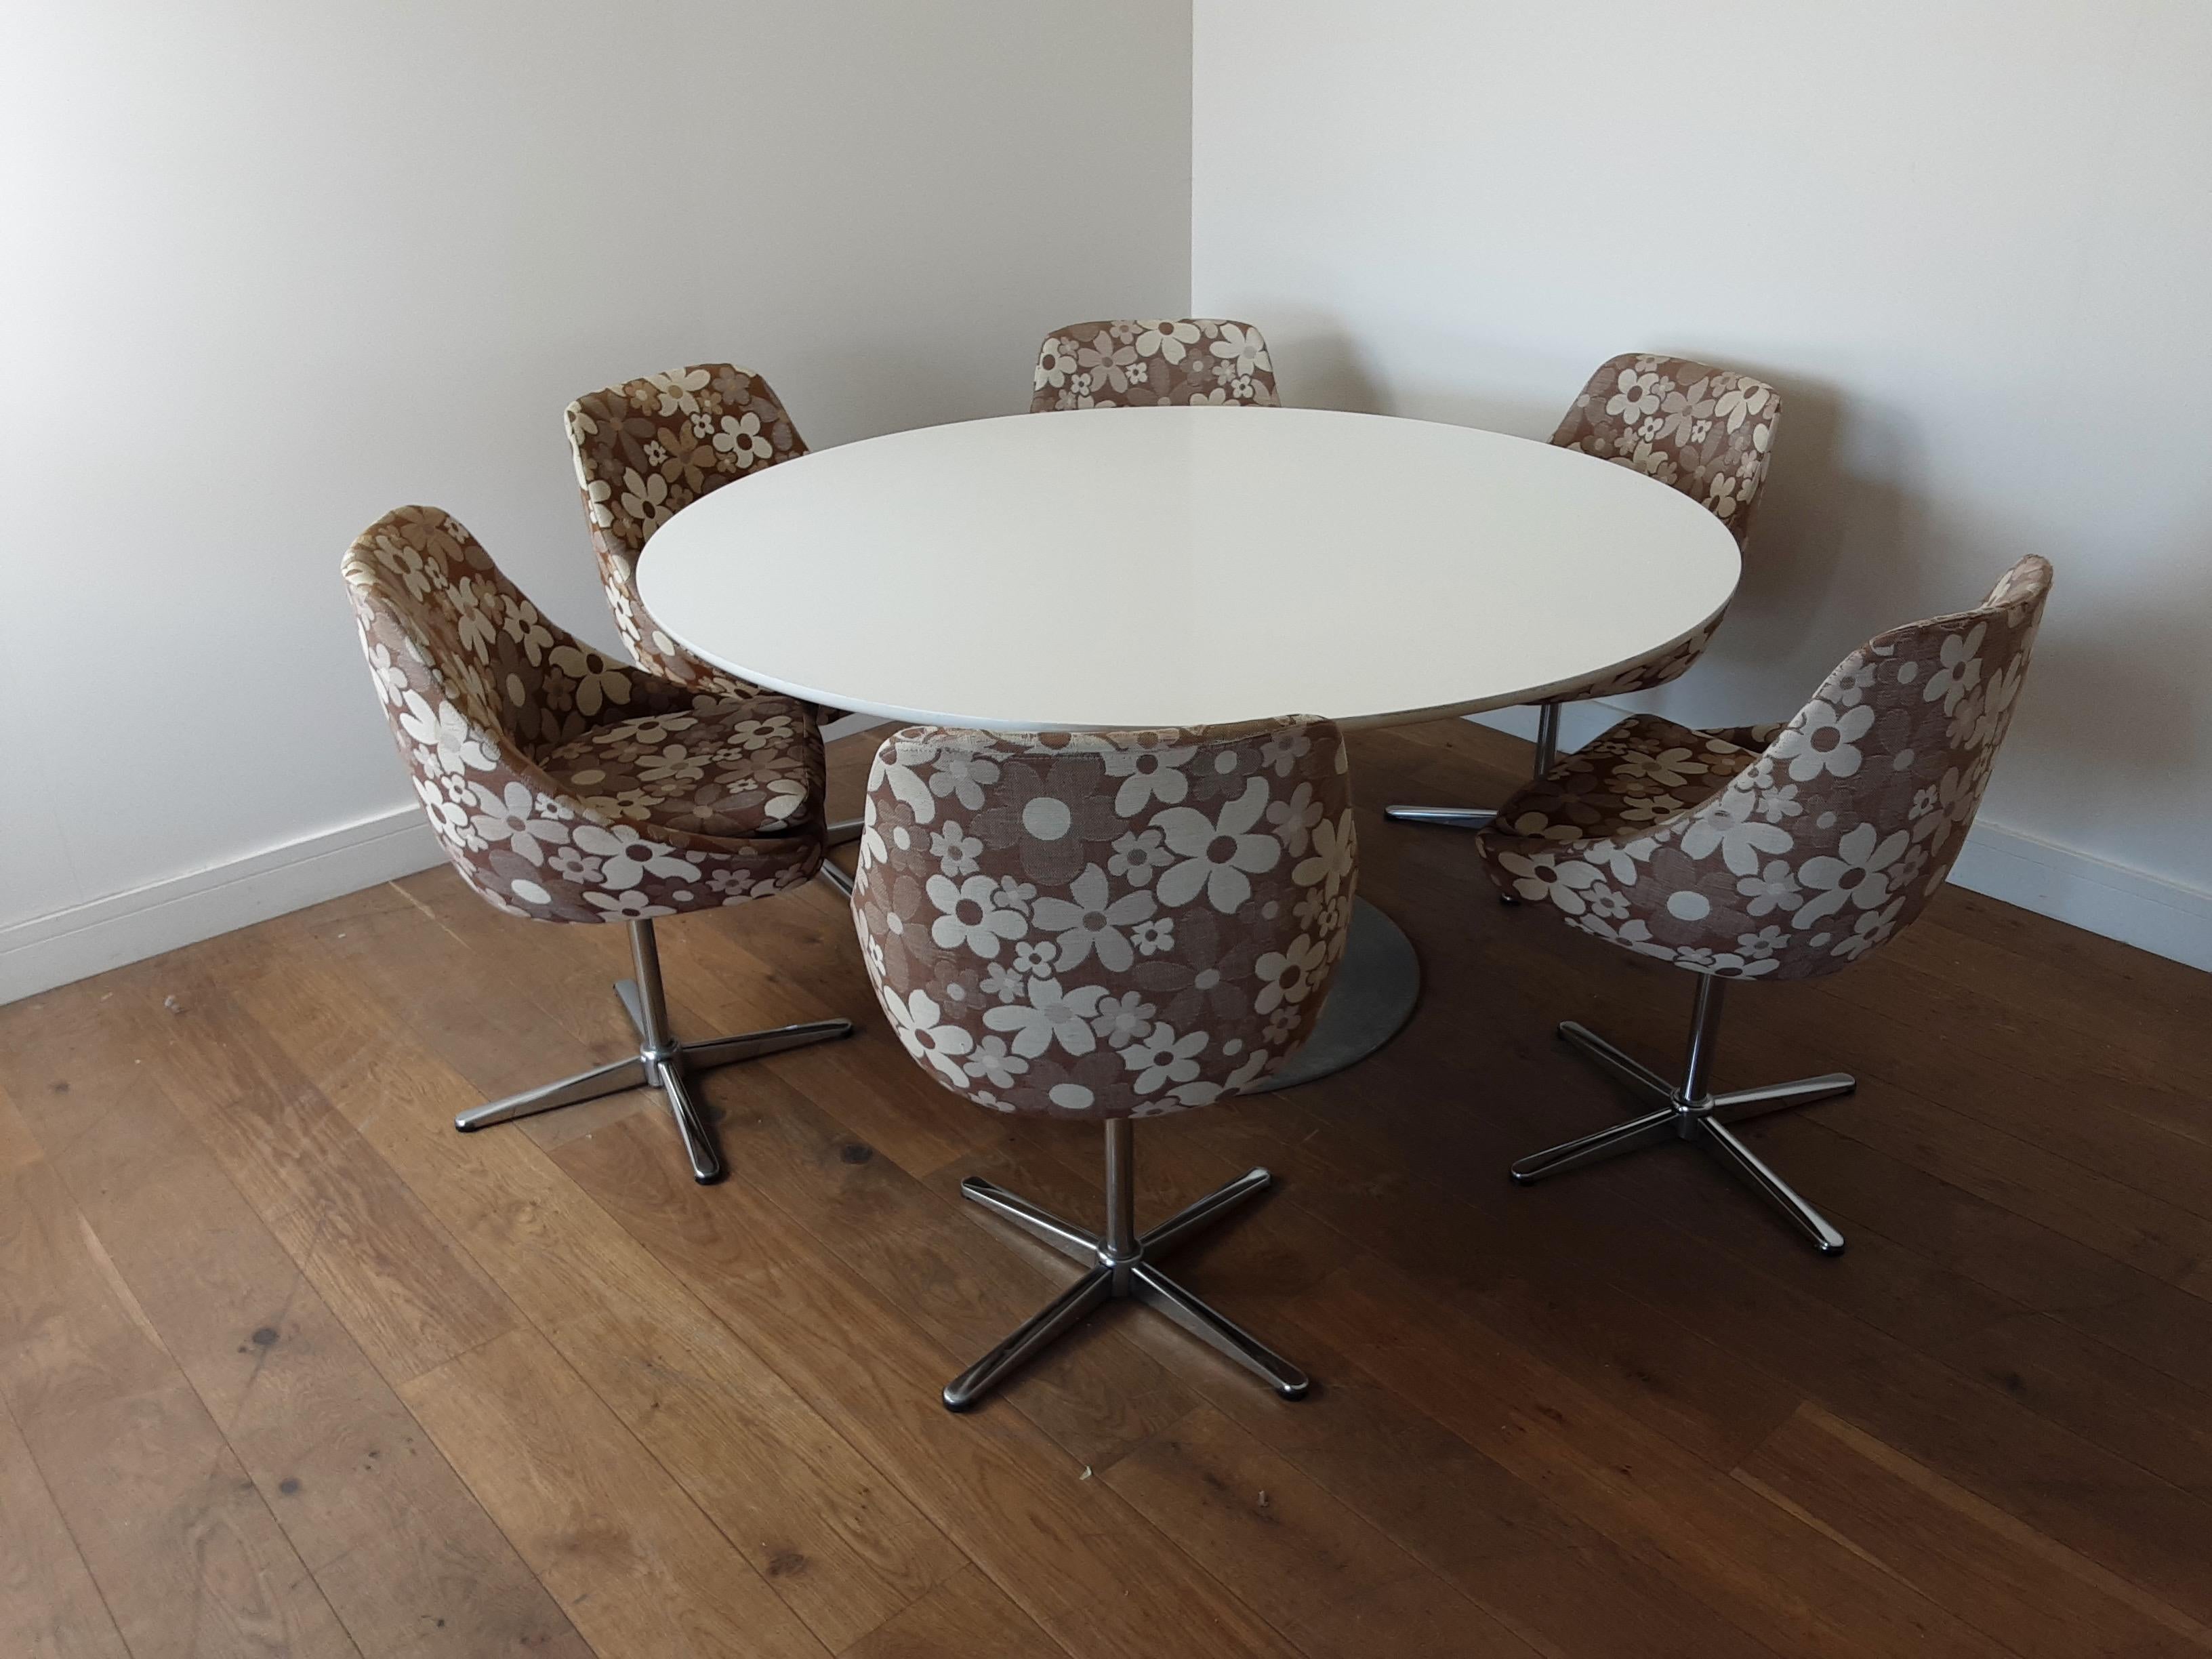 Super 1960s dining set with aluminium tulip base table with laminated top and a set of six egg shape swivel chairs in original upholstery.
Measures: Table 73 cm height, 151 cm diameter
Chairs 84 cm H, 46 cm W, 58 cm D, seat H 46cm, seat D 37cm.